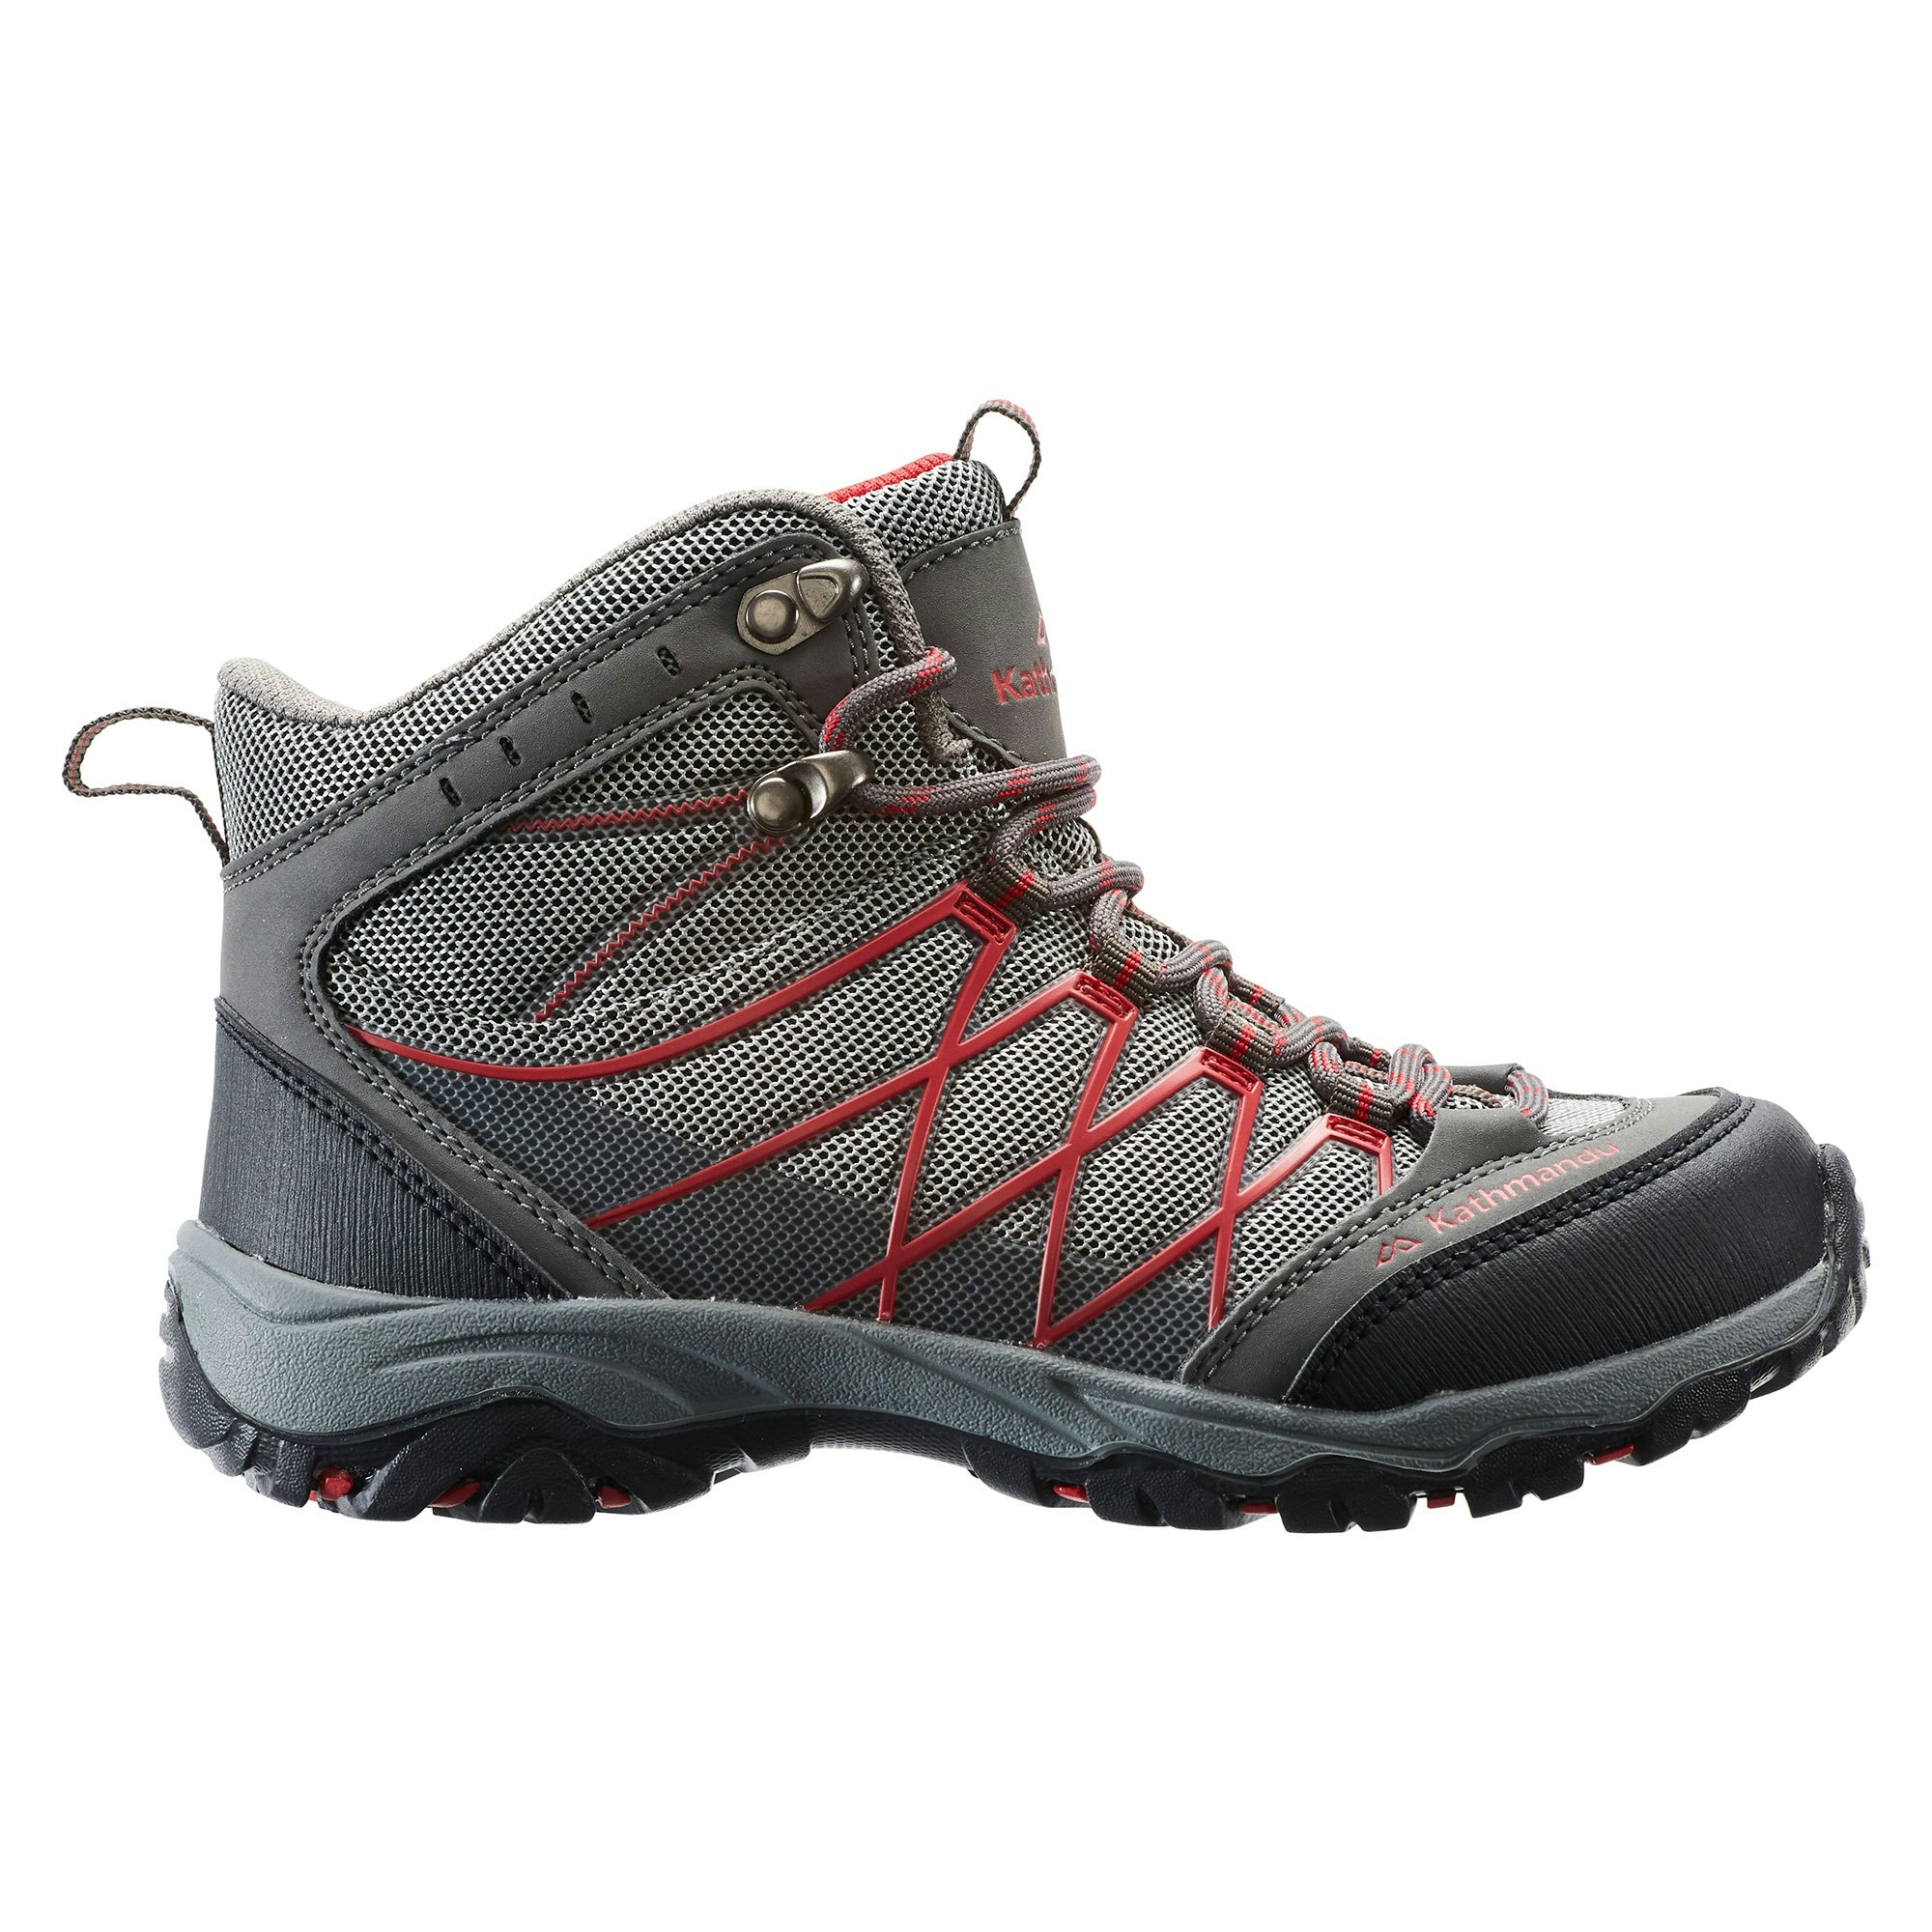 youth hiking shoes clearance